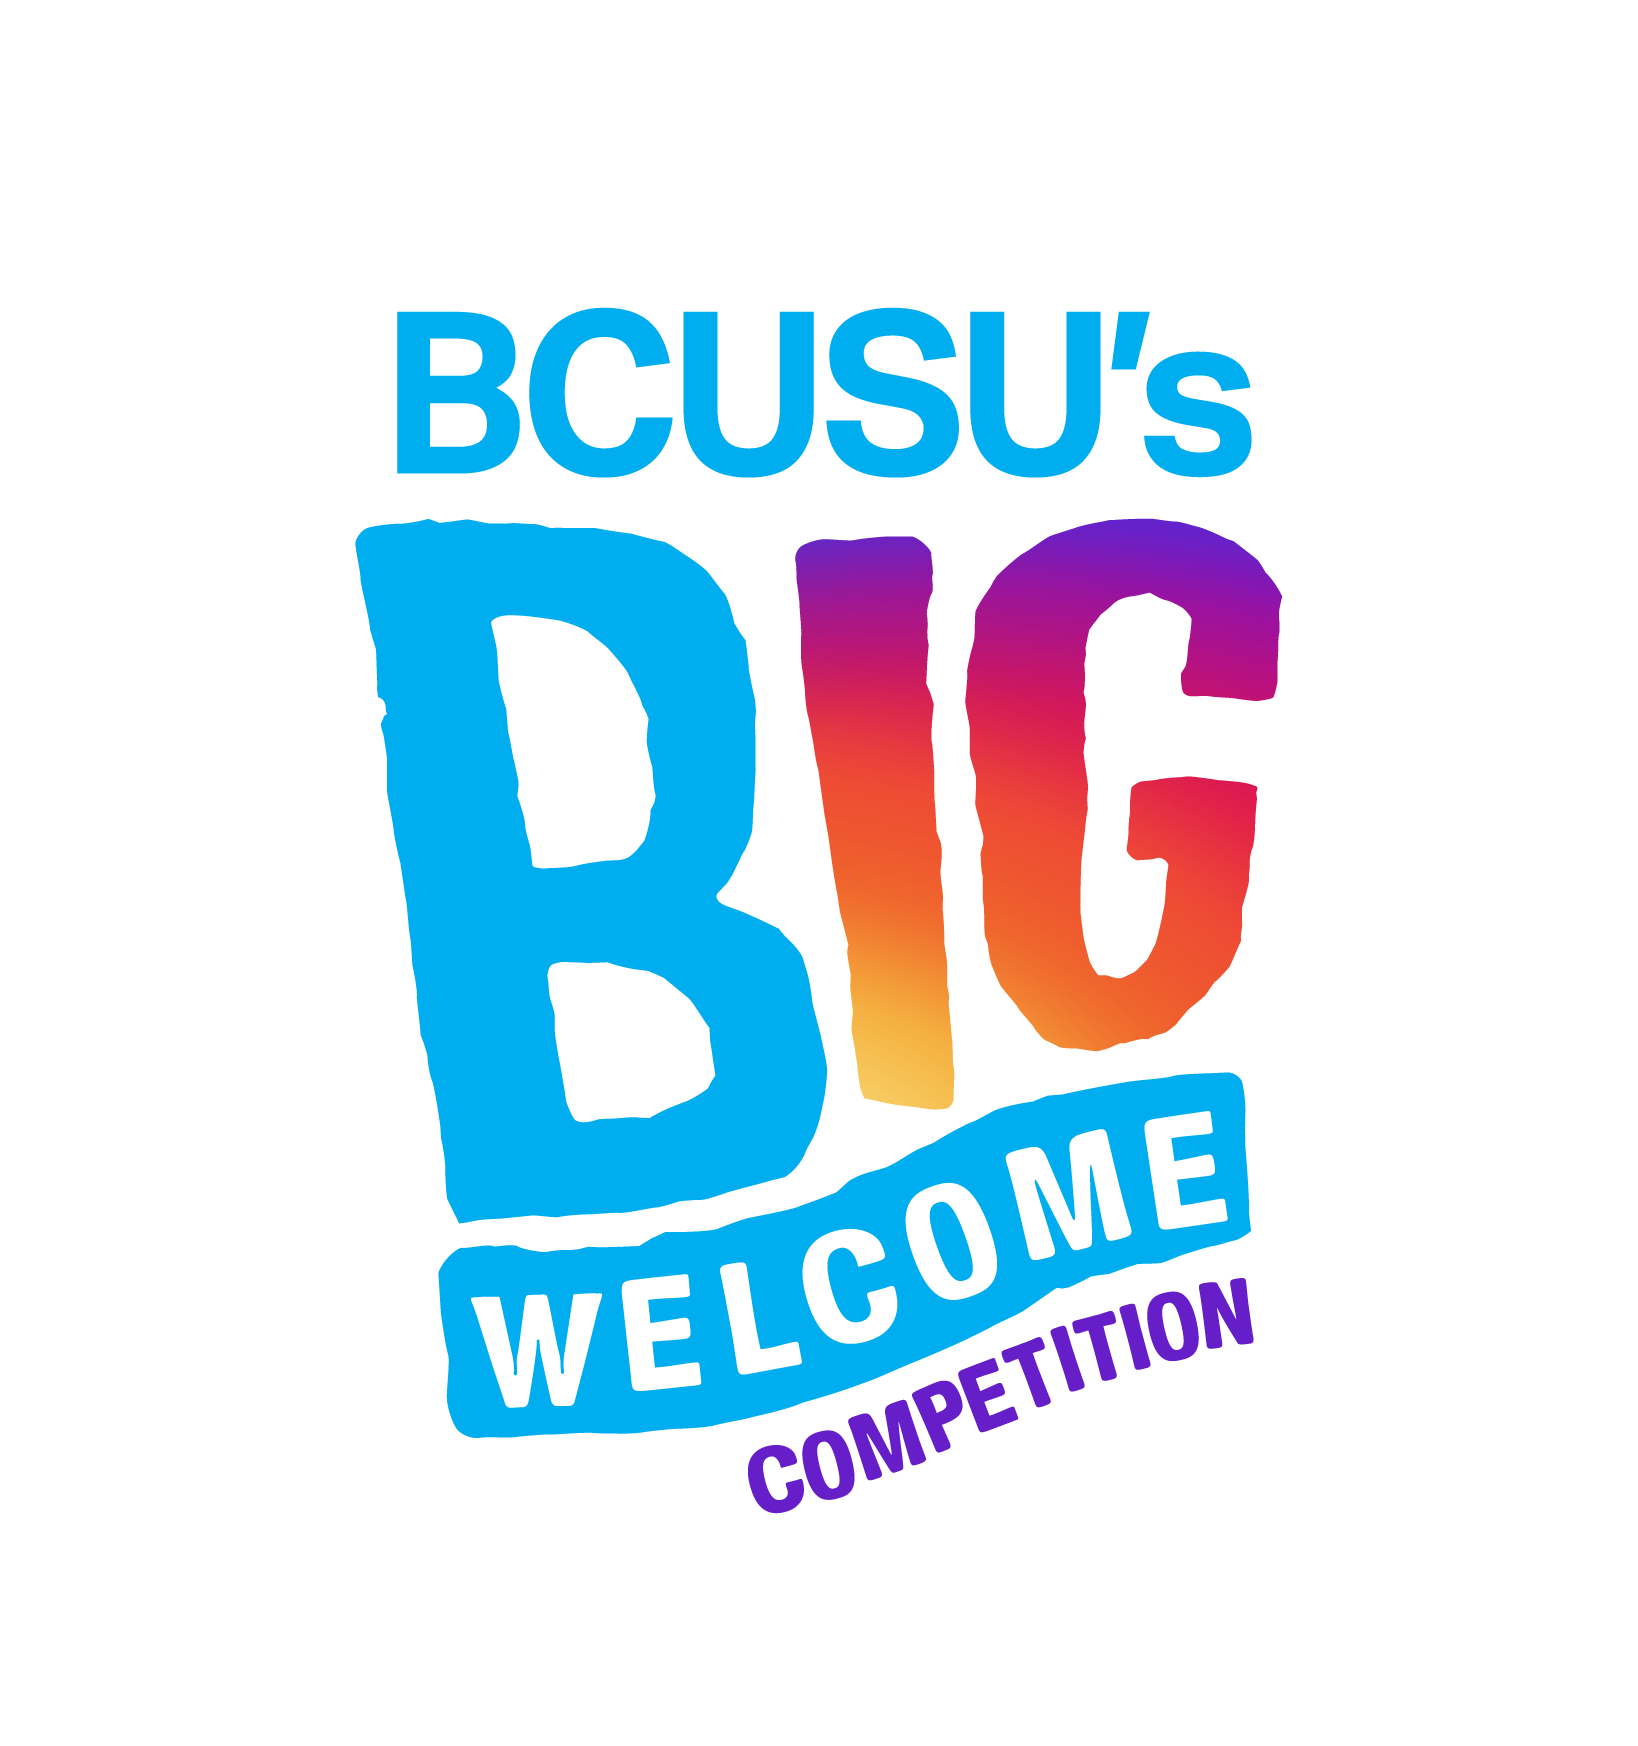 BCUSU's Big Welcome Competition